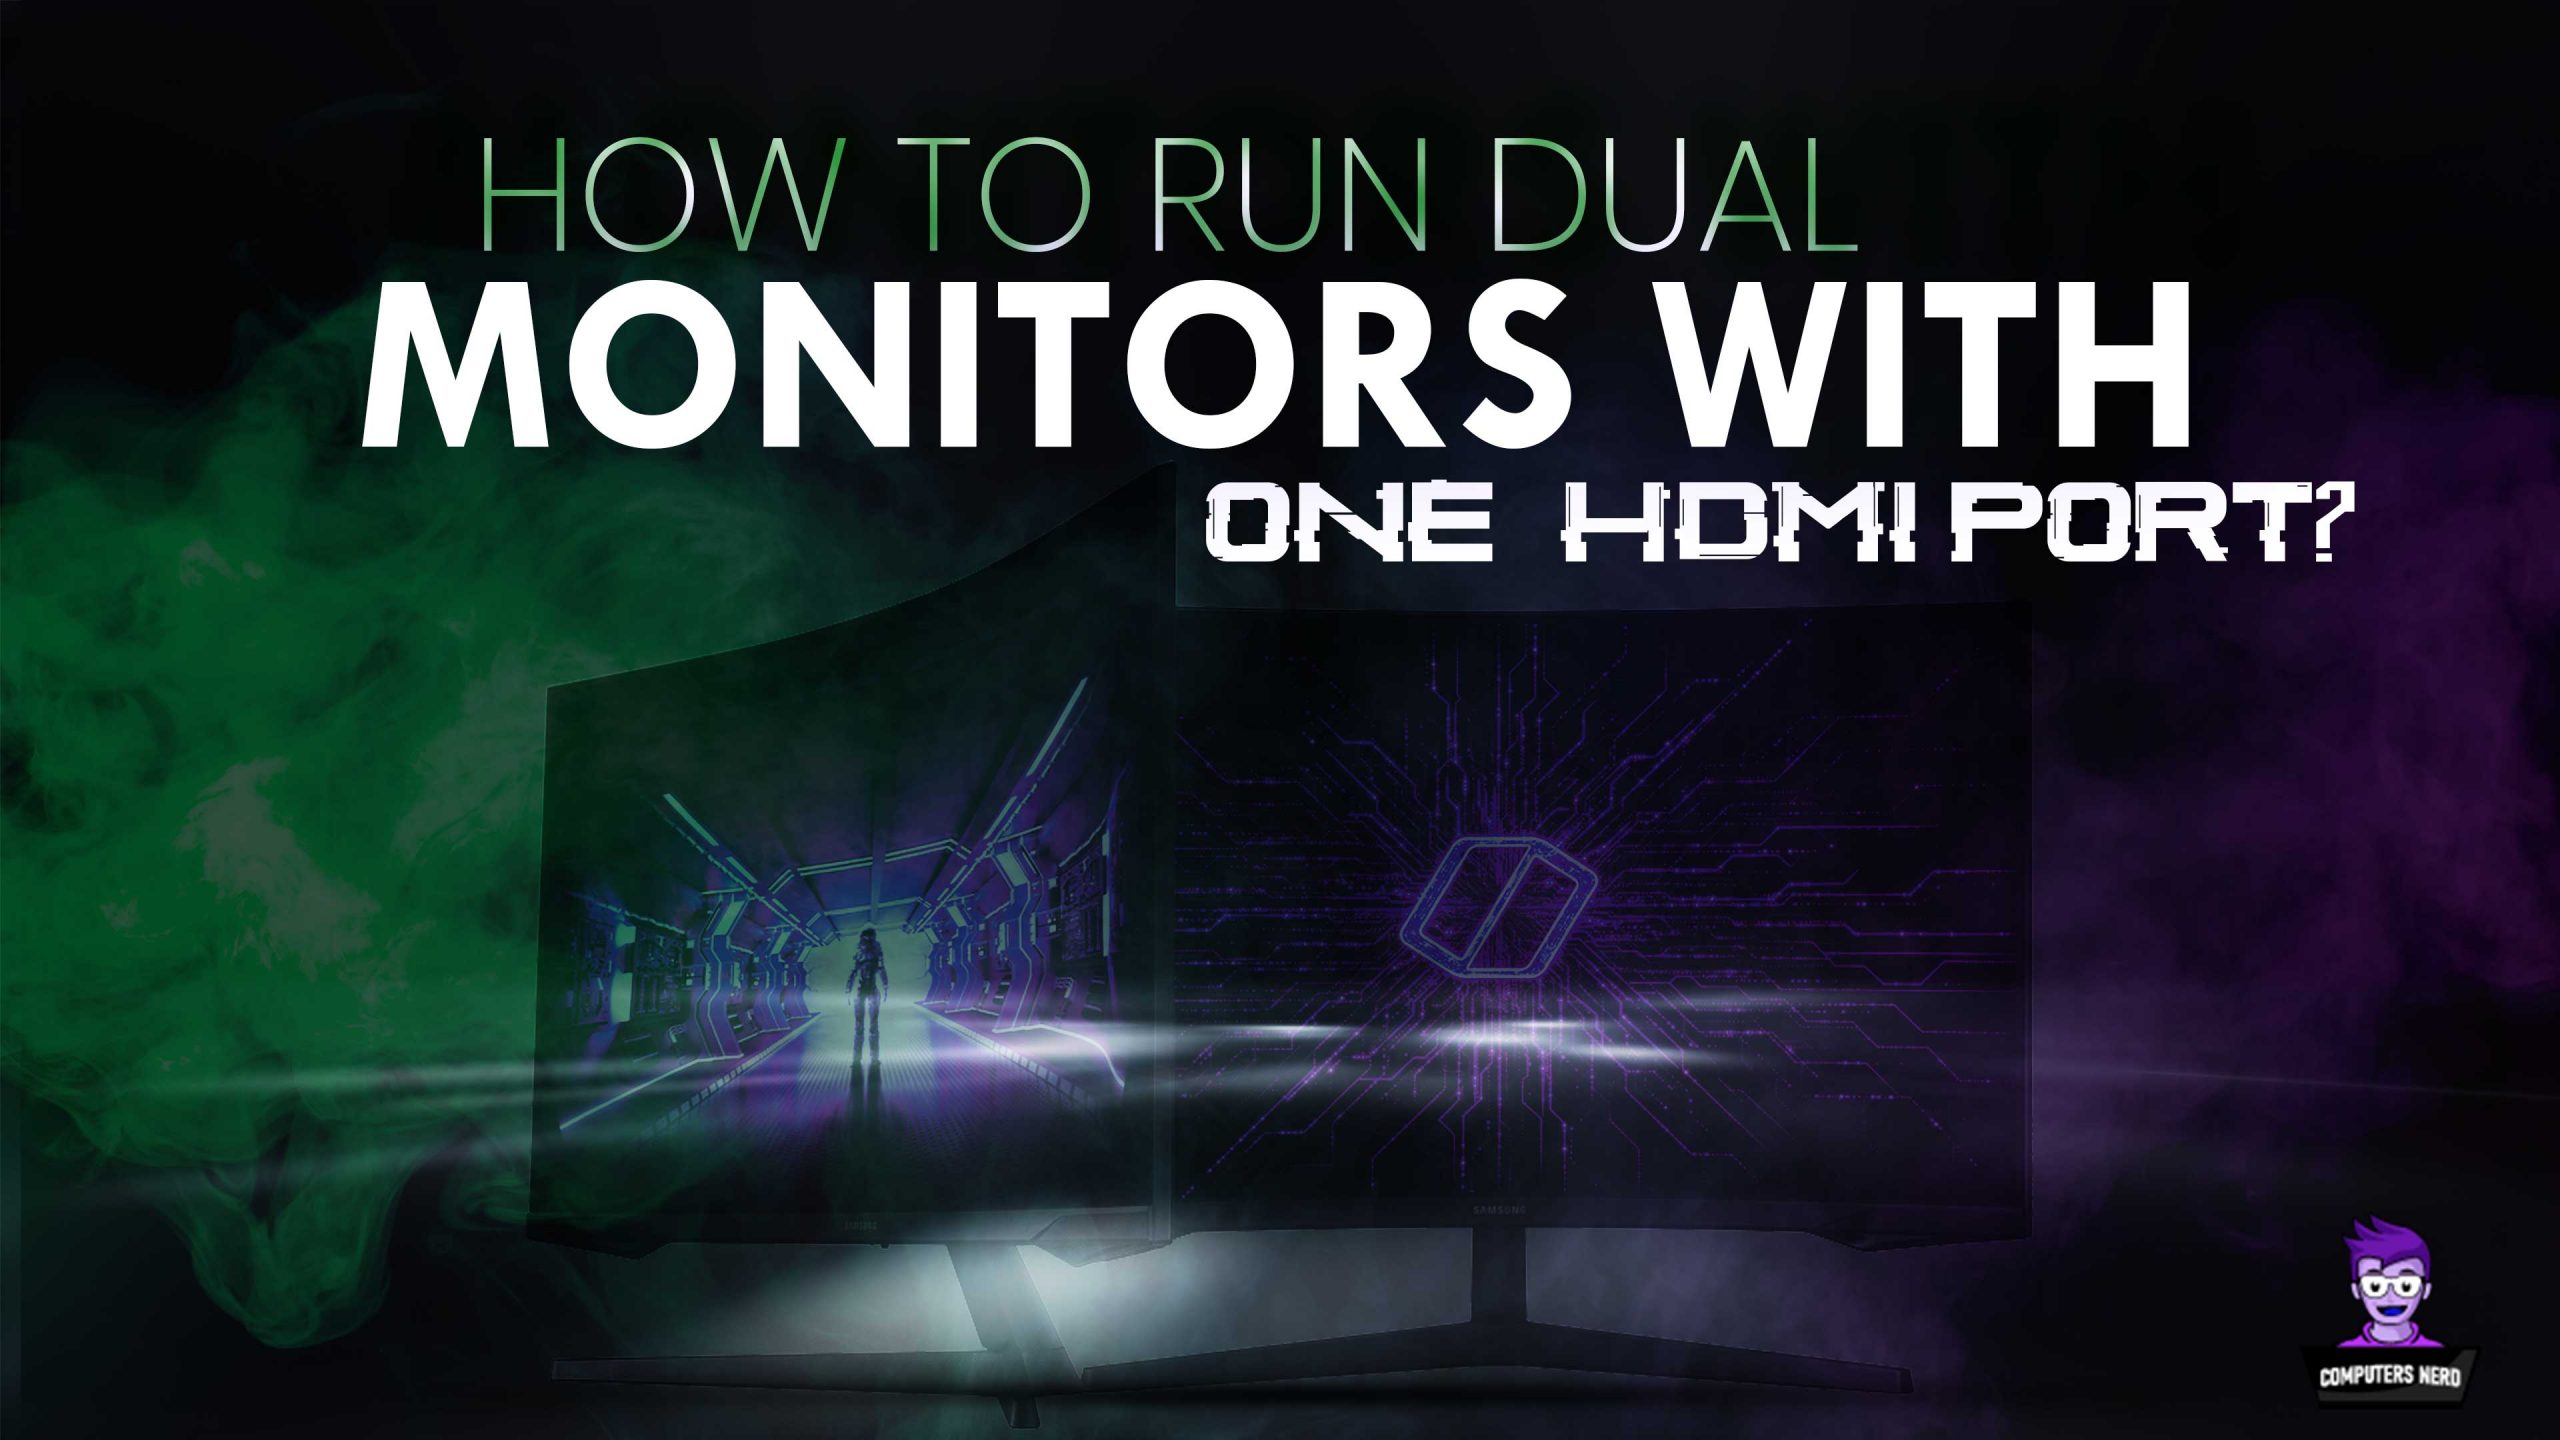 How To Run Dual Monitors With One HDMI port featured image